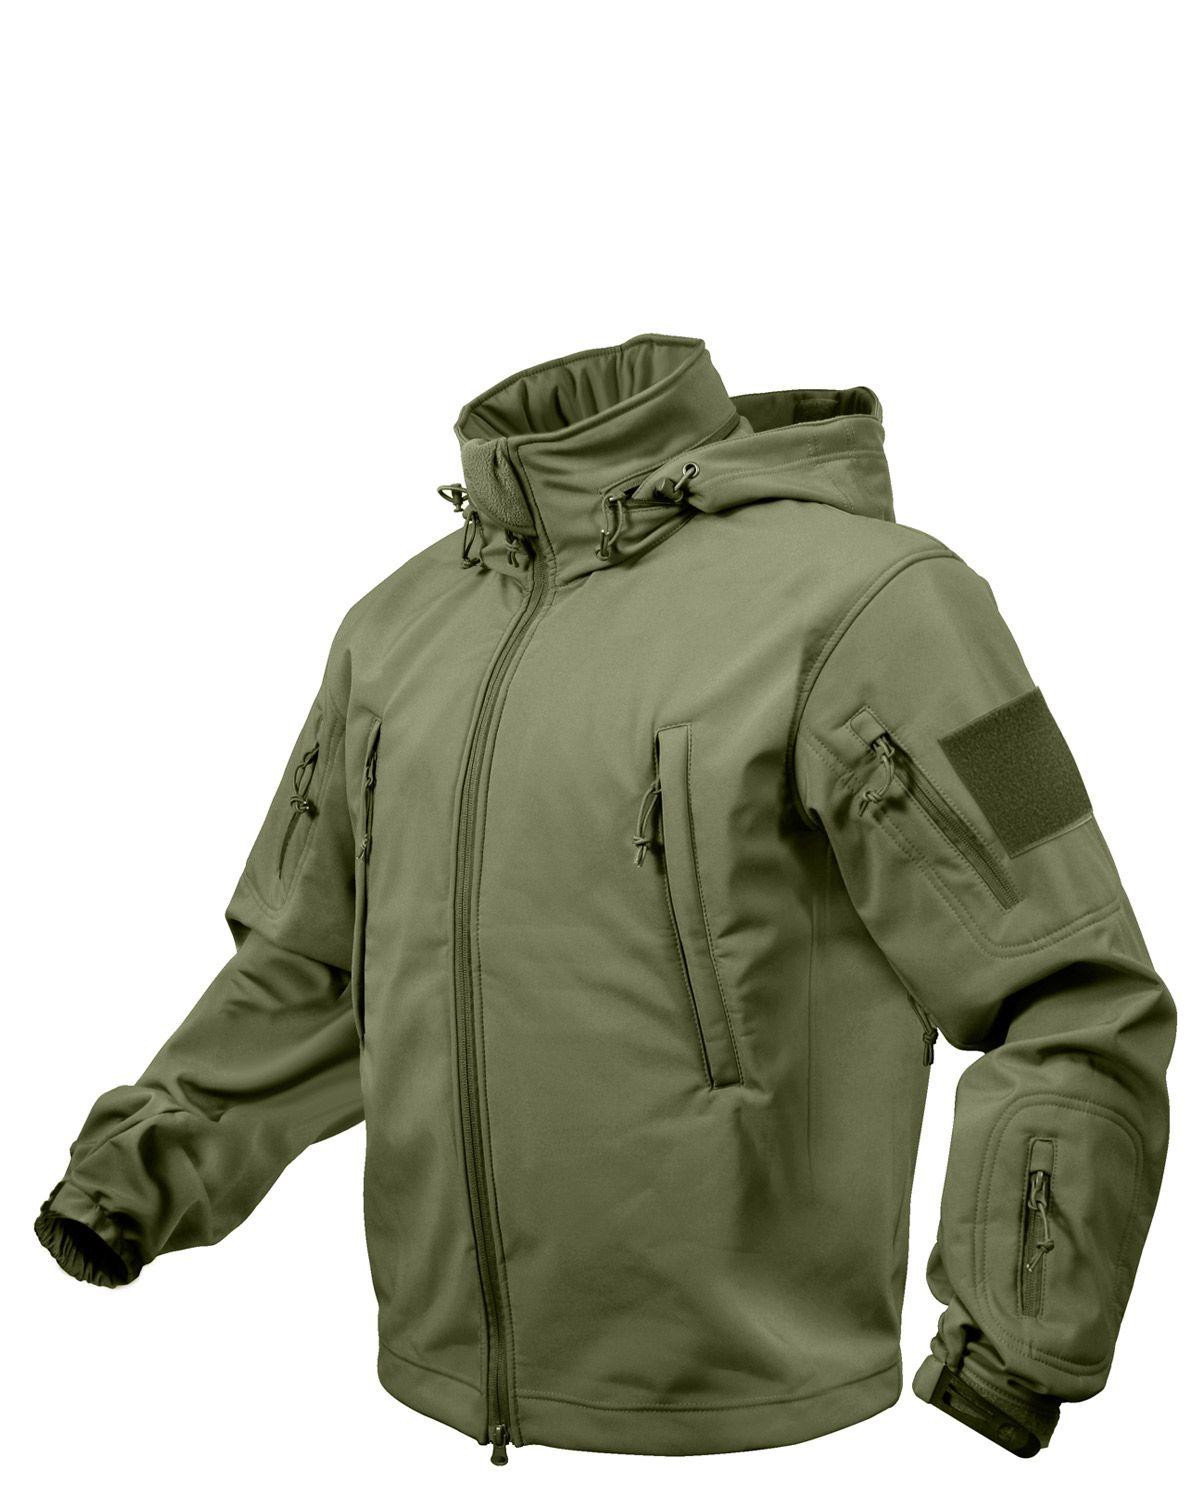 Rothco Special Ops Softshell Jakke (Oliven, 3XL)